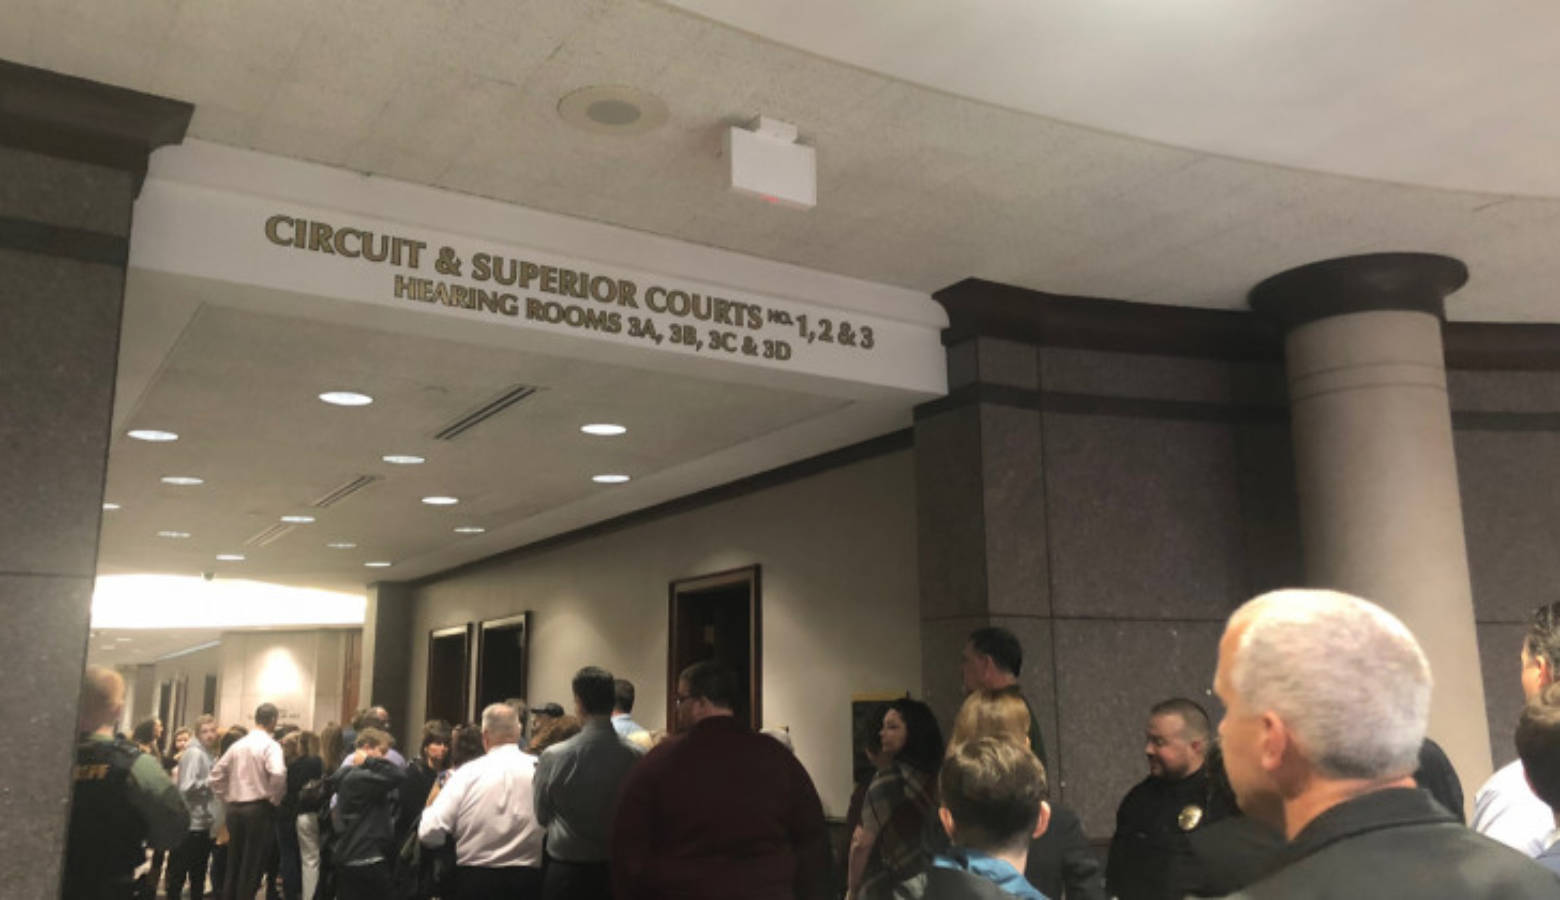 A line formed outside the Hamilton County Circuit Court Monday, Nov. 5. Not everyone got a seat in the courtroom for hearing of the juvenile accused of shooting classmate and teacher at Noblesville West Middle School.